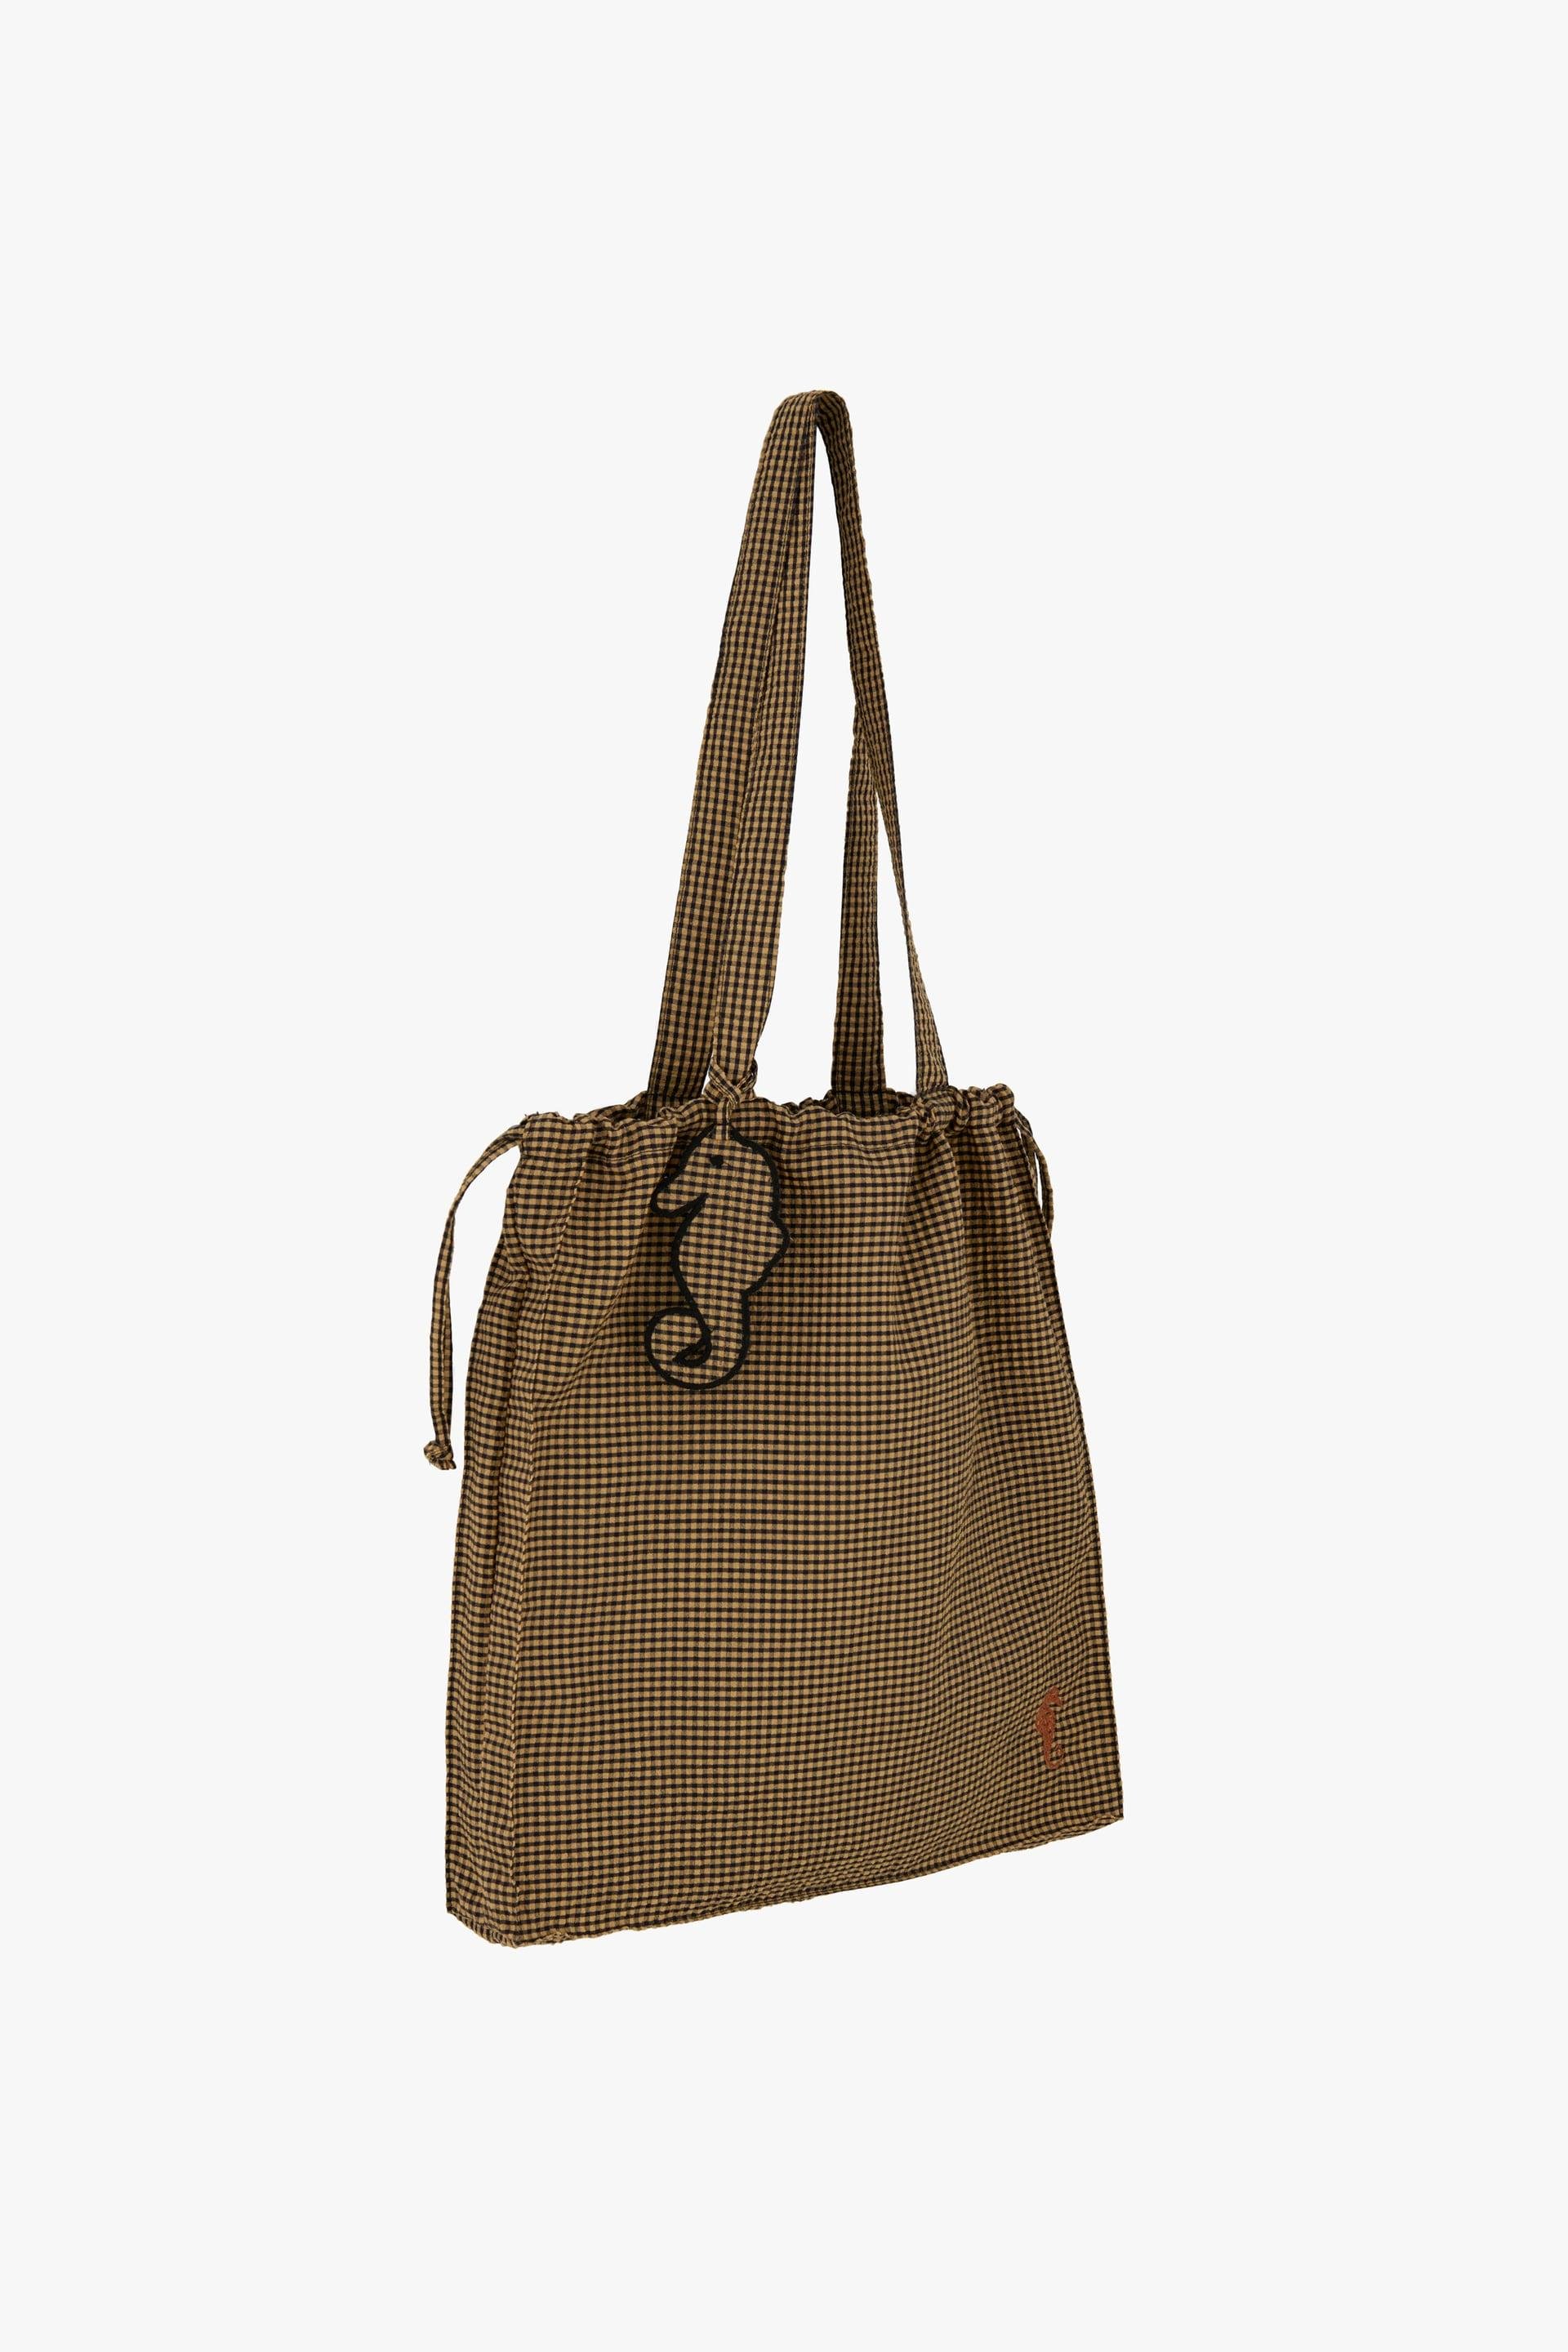 GINGHAM SEAHORSE TOTE BAG LIMITED EDITION by ZARA